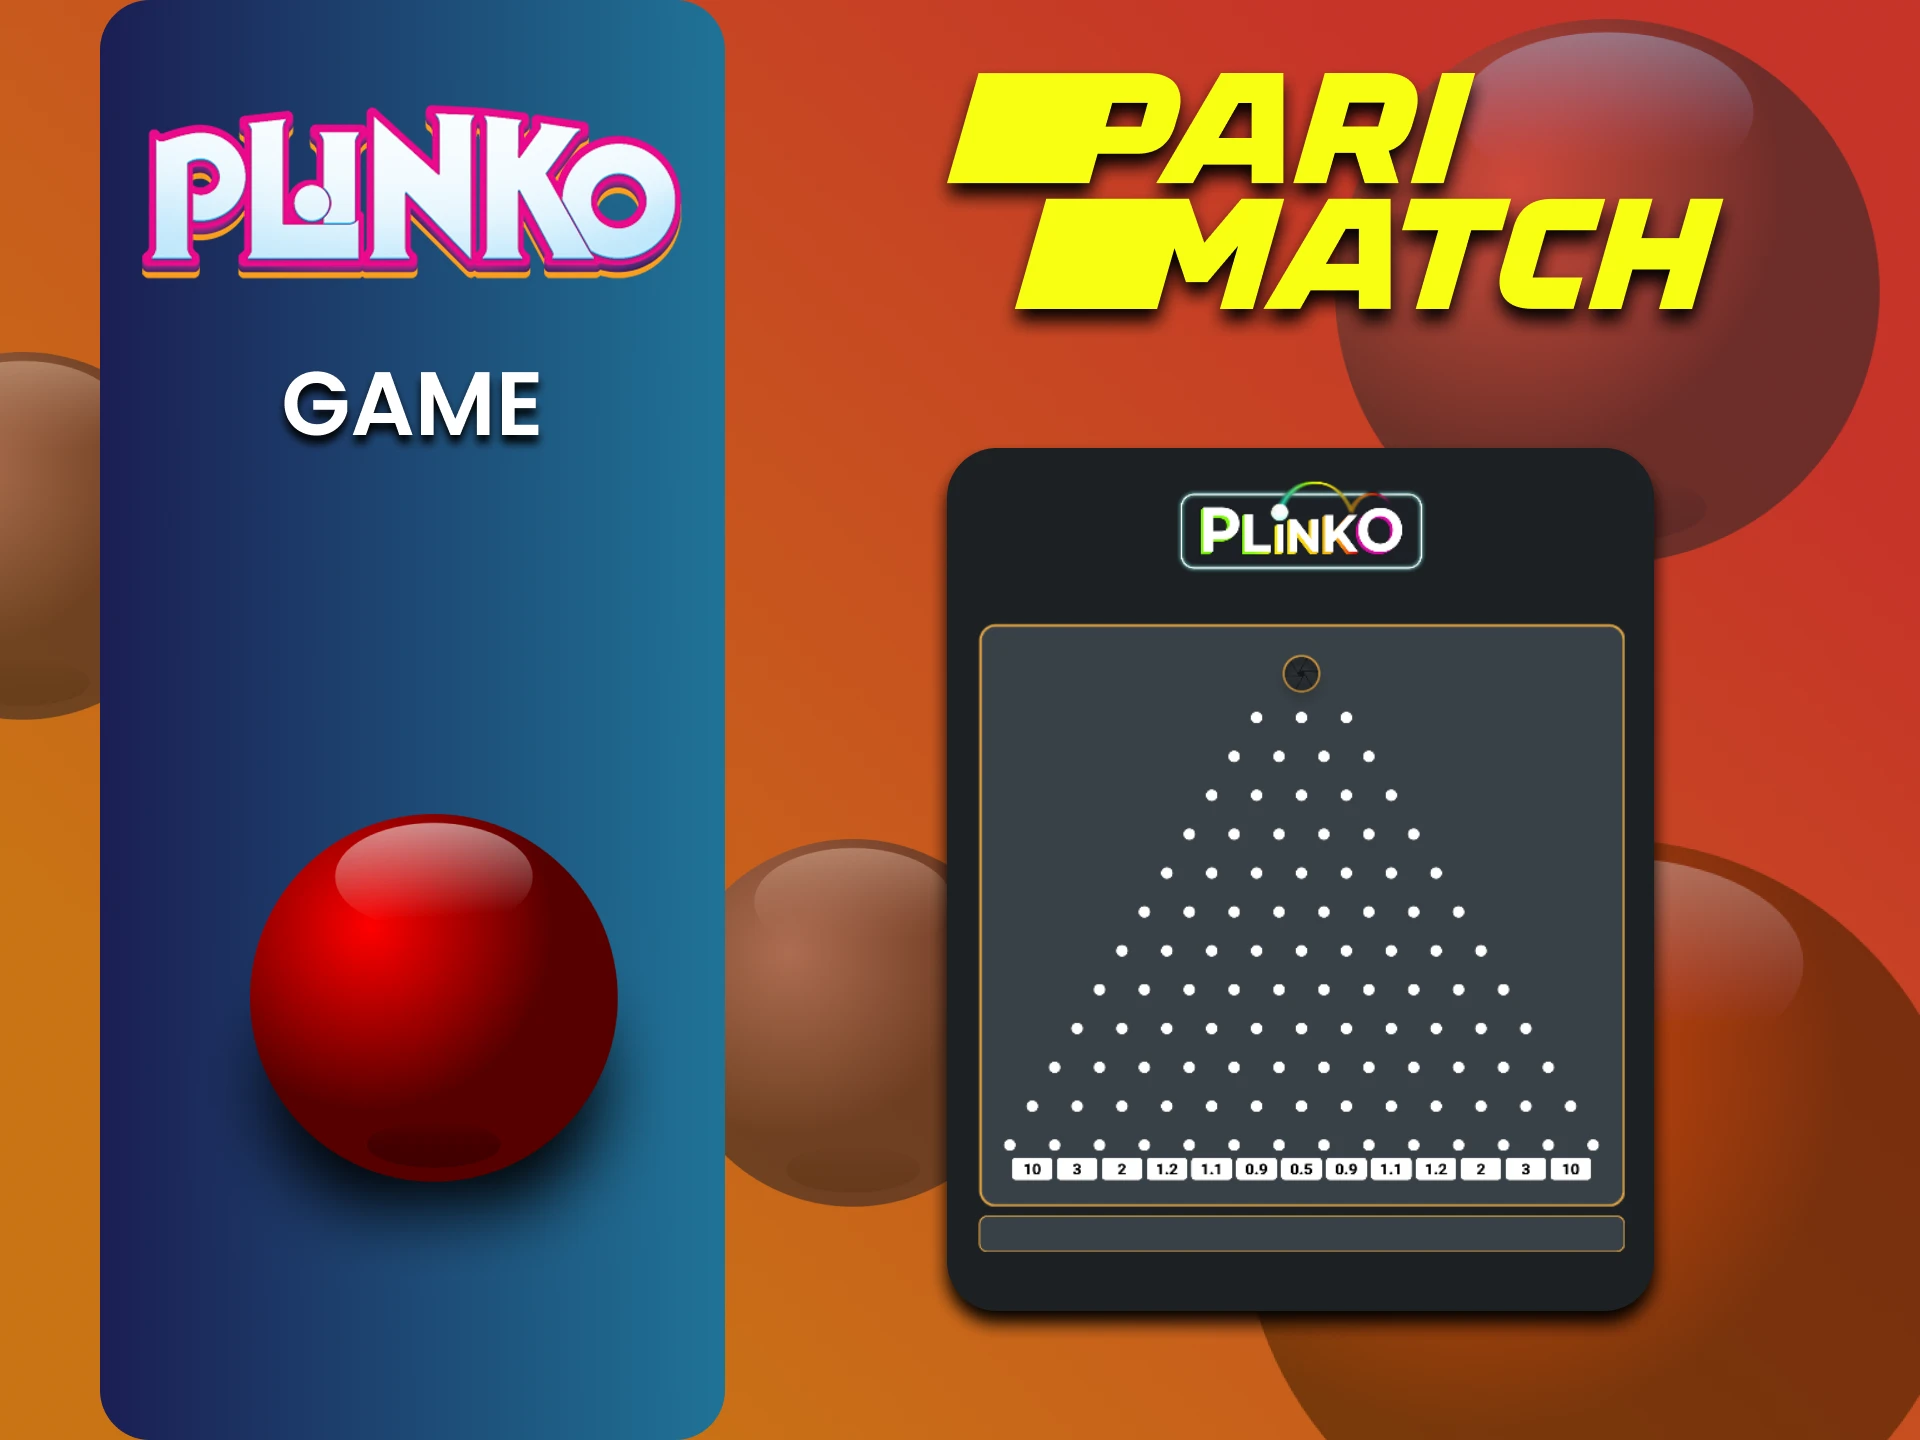 Find out everything about the Plinko game on Parimatch.